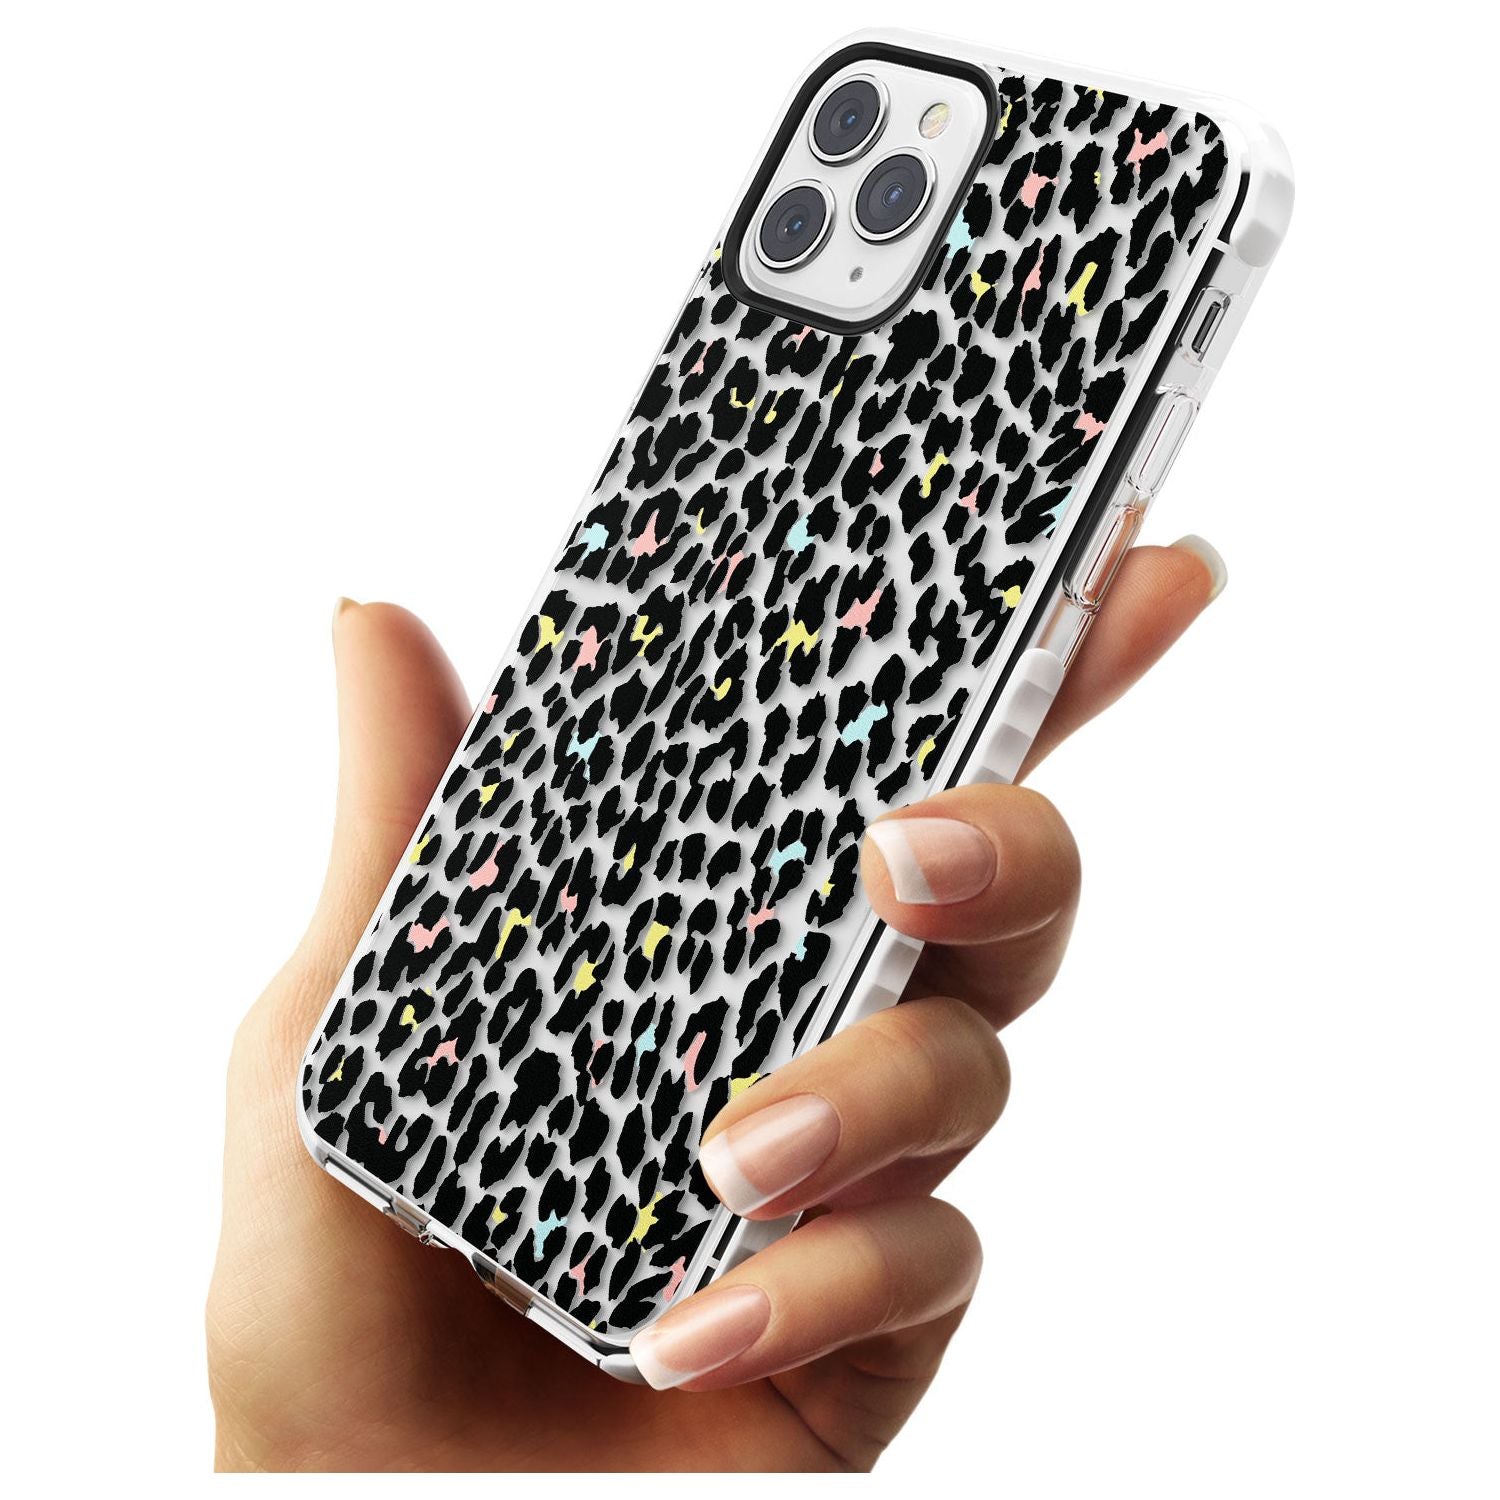 Mixed Pastels Leopard Print - Transparent Impact Phone Case for iPhone 11 Pro Max